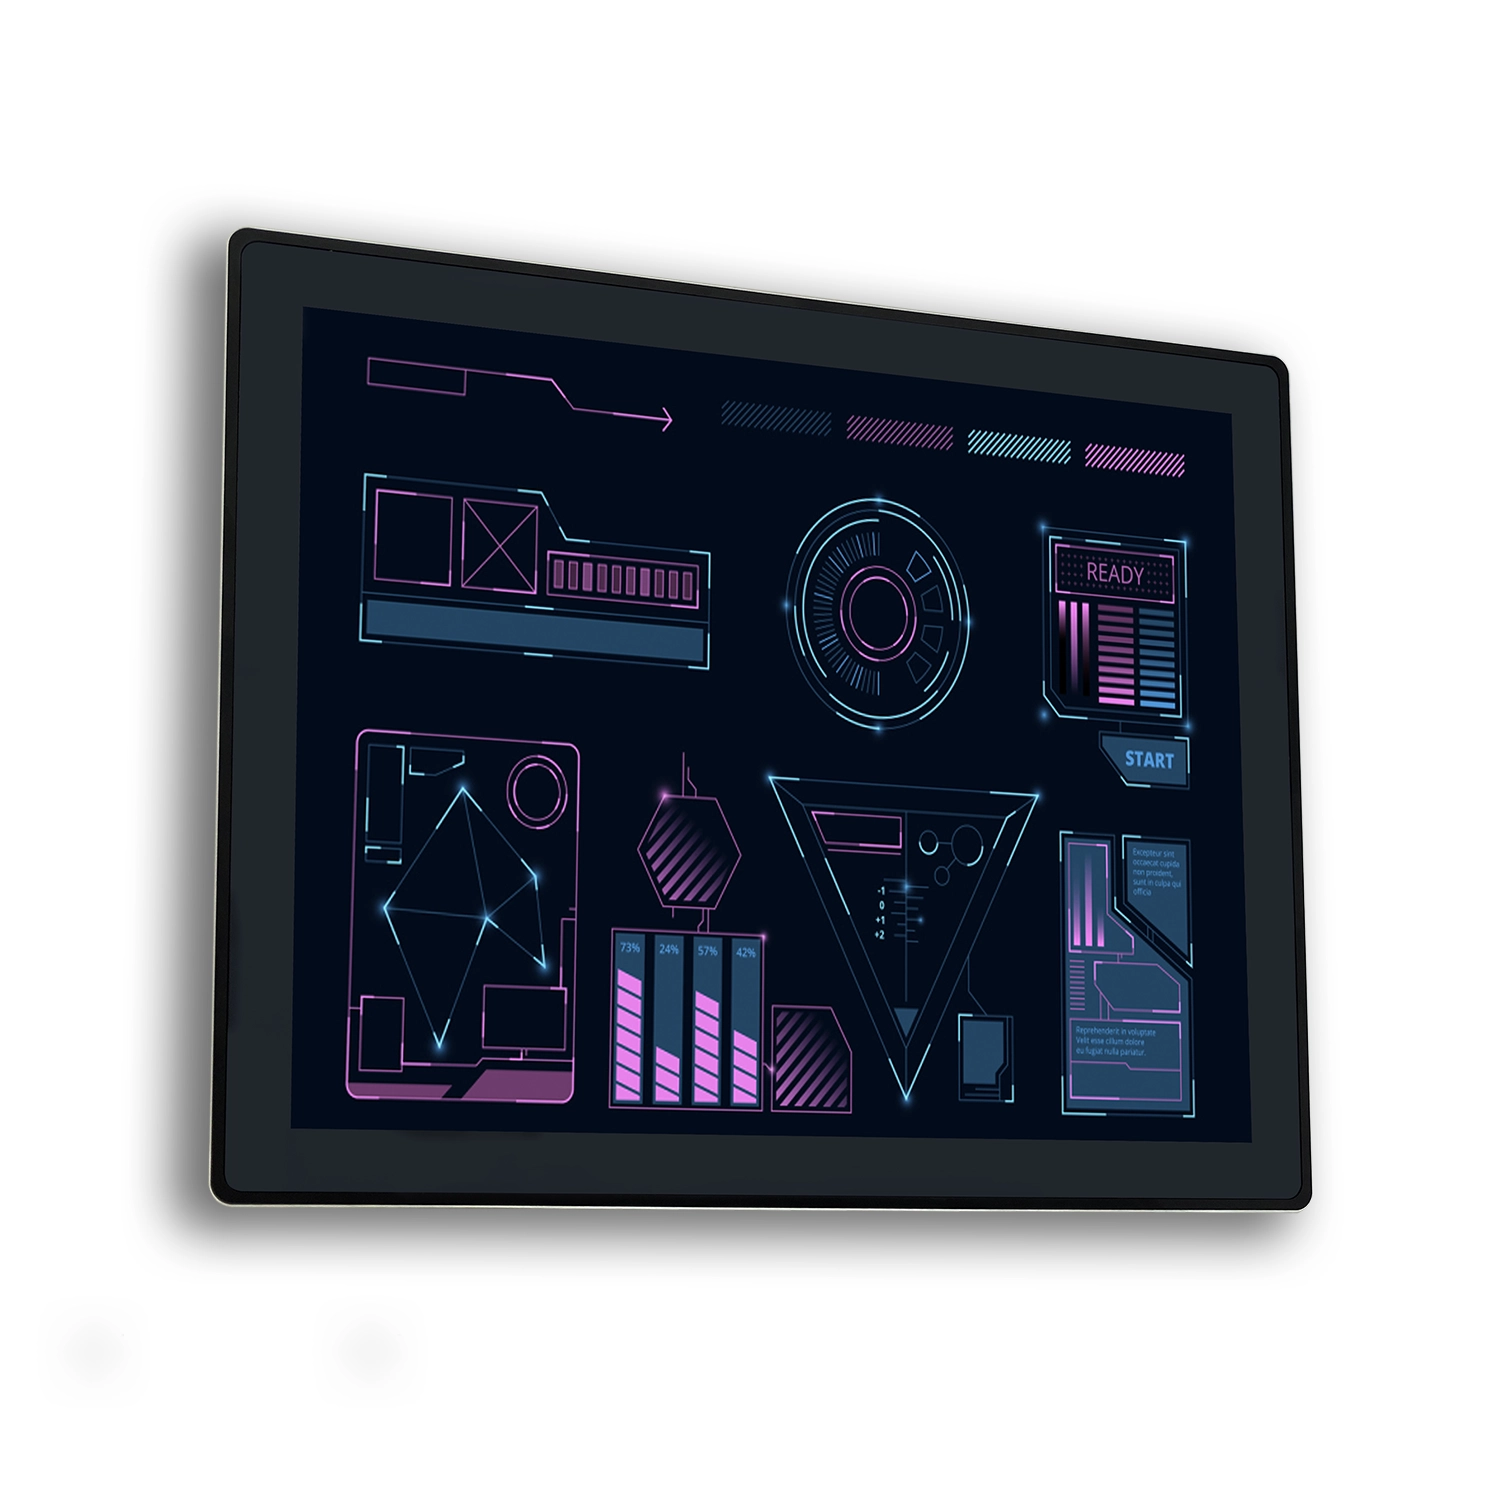 INDUSTRIAL RESISTIVE TOUCH MONITOR NEO BLACK 17’’ KT-170-RP000M1